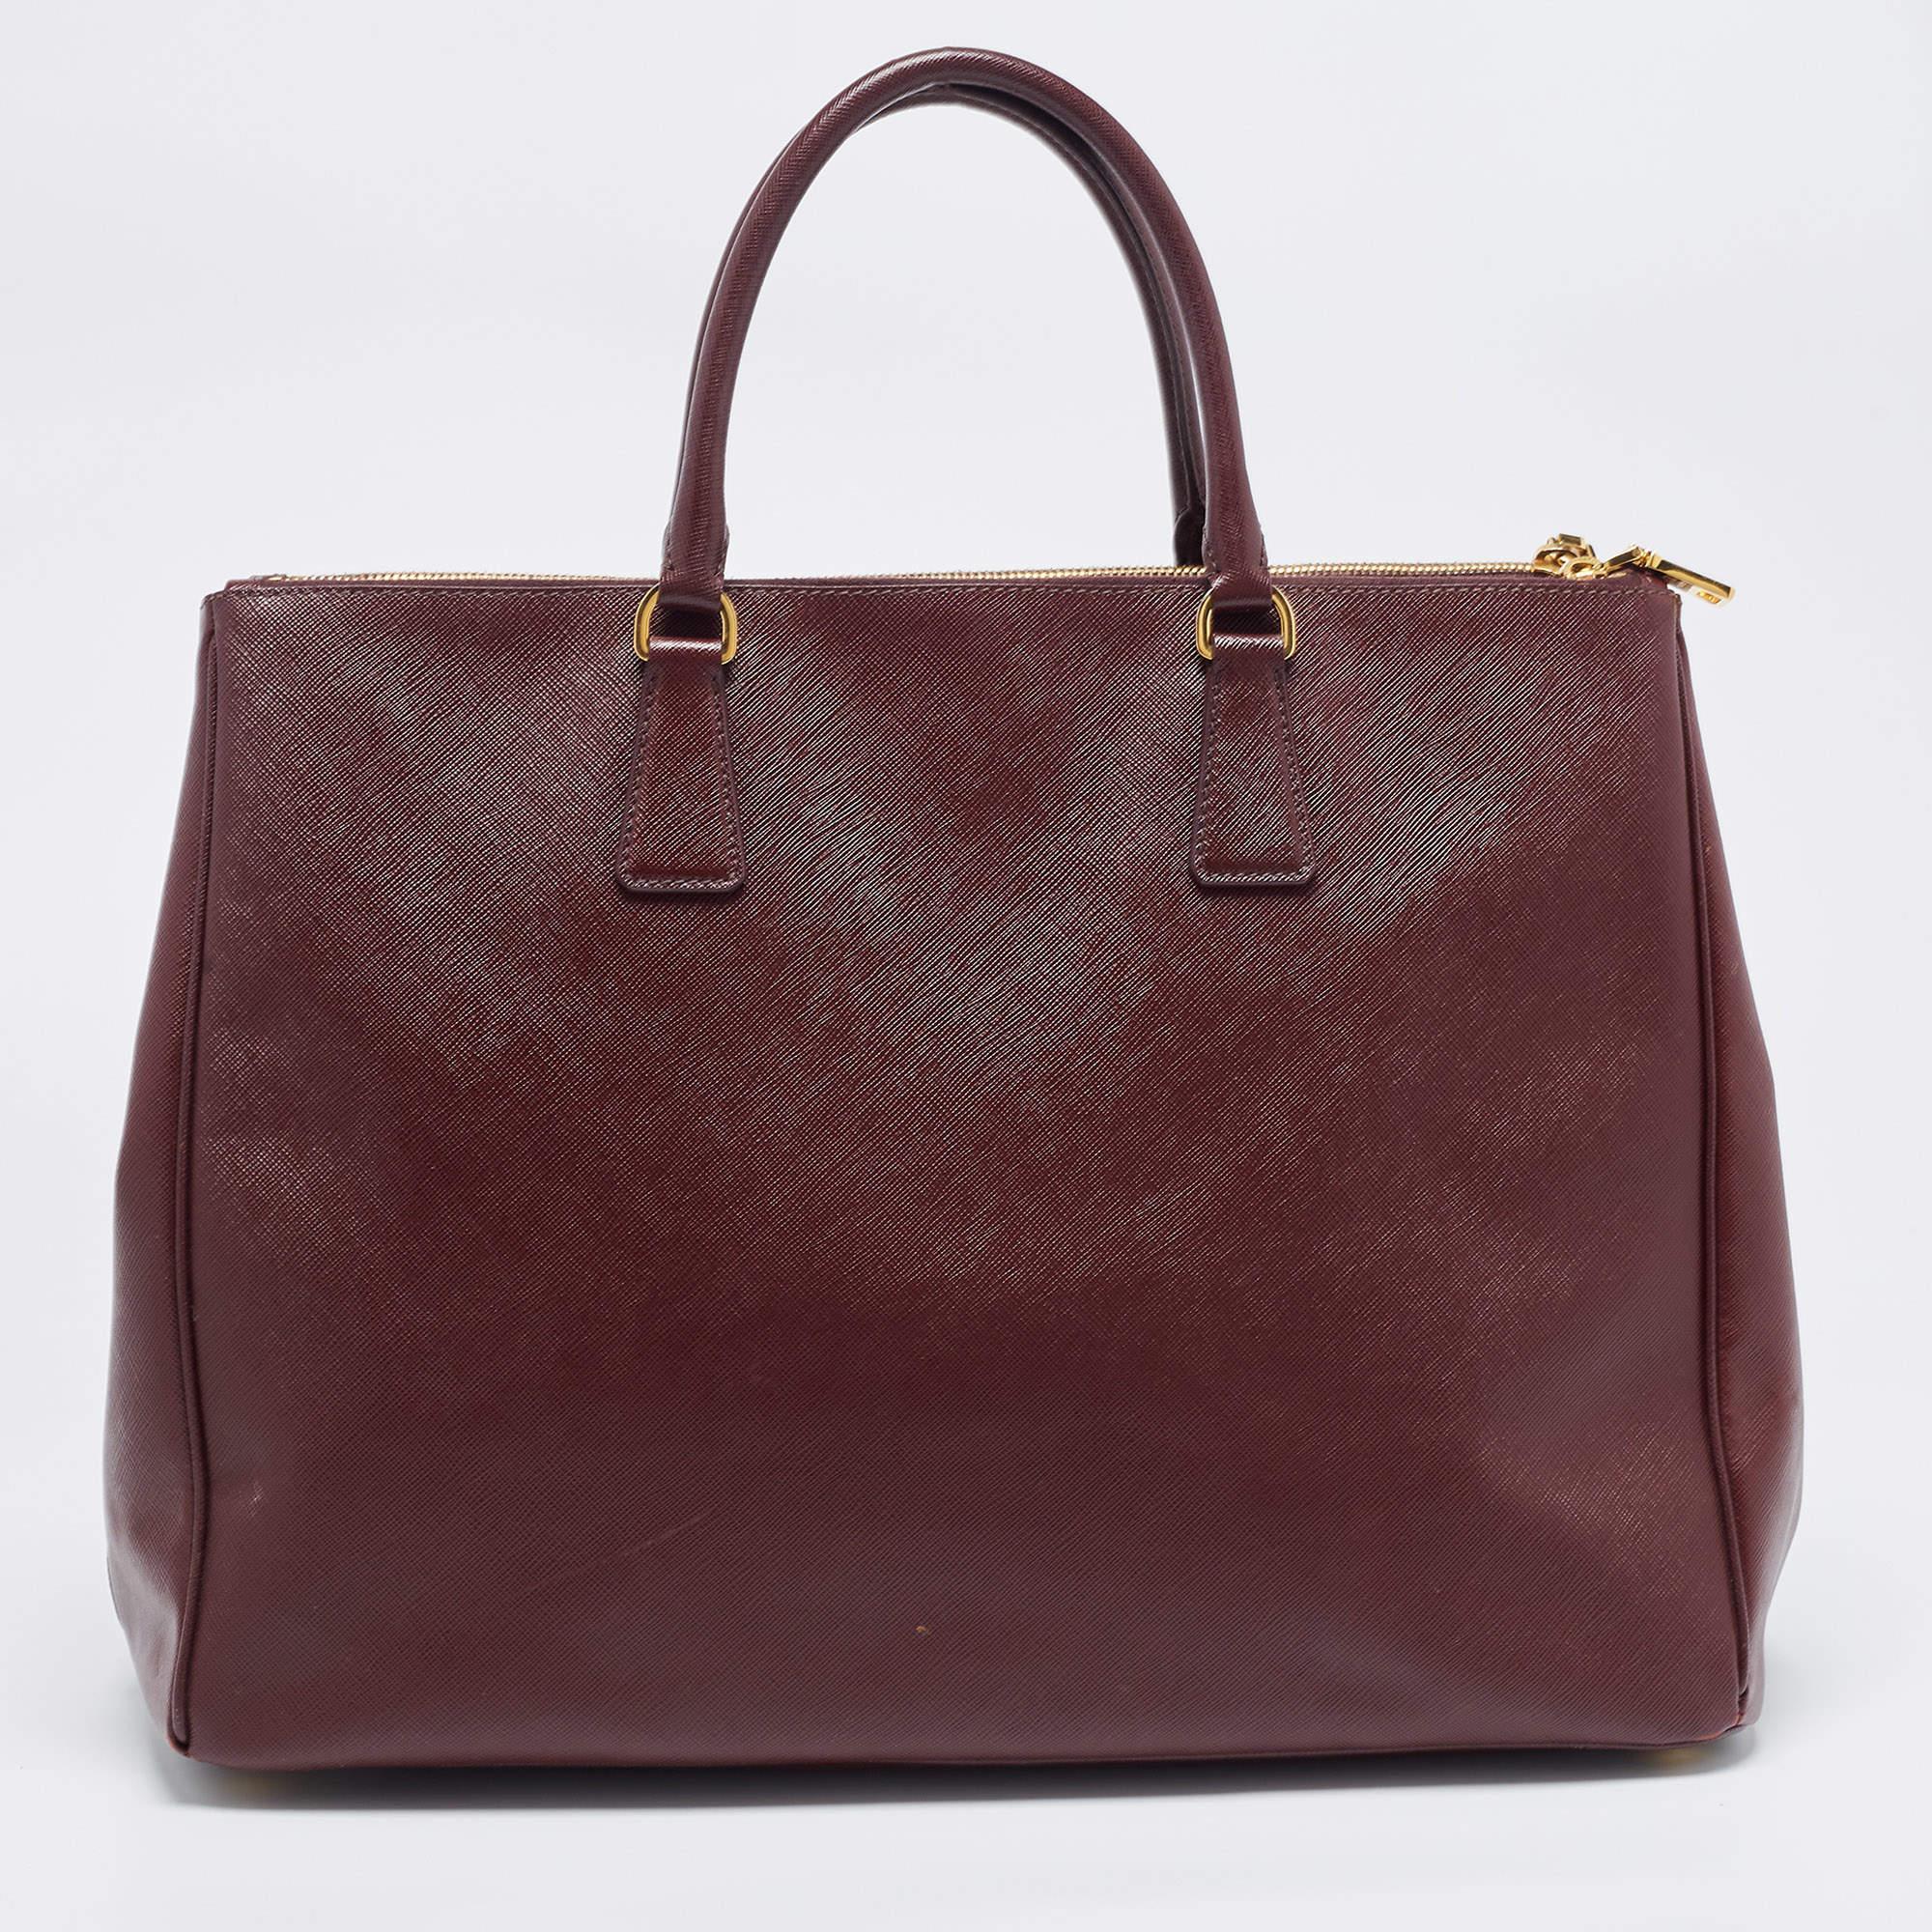 This extra-large Executive tote by Prada will be a loved addition to your closet. It has been crafted from Saffiano leather and styled with gold-tone hardware. The burgundy bag comes with two top handles, double zip compartments, and a spacious